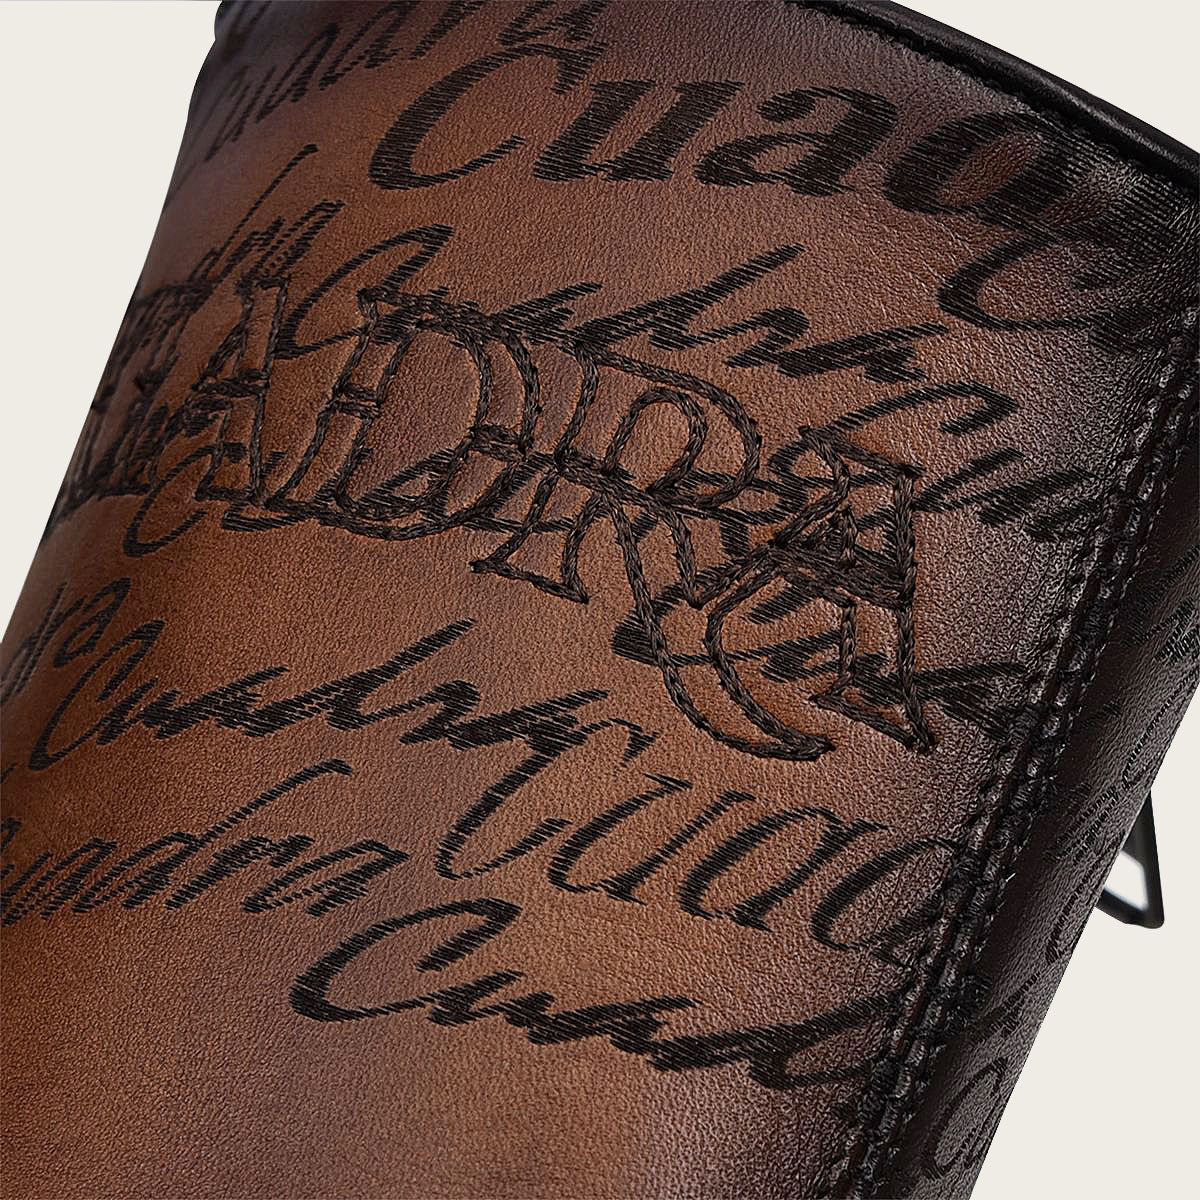 Cuadra logo embroidery and laser engraving on honey leather boot